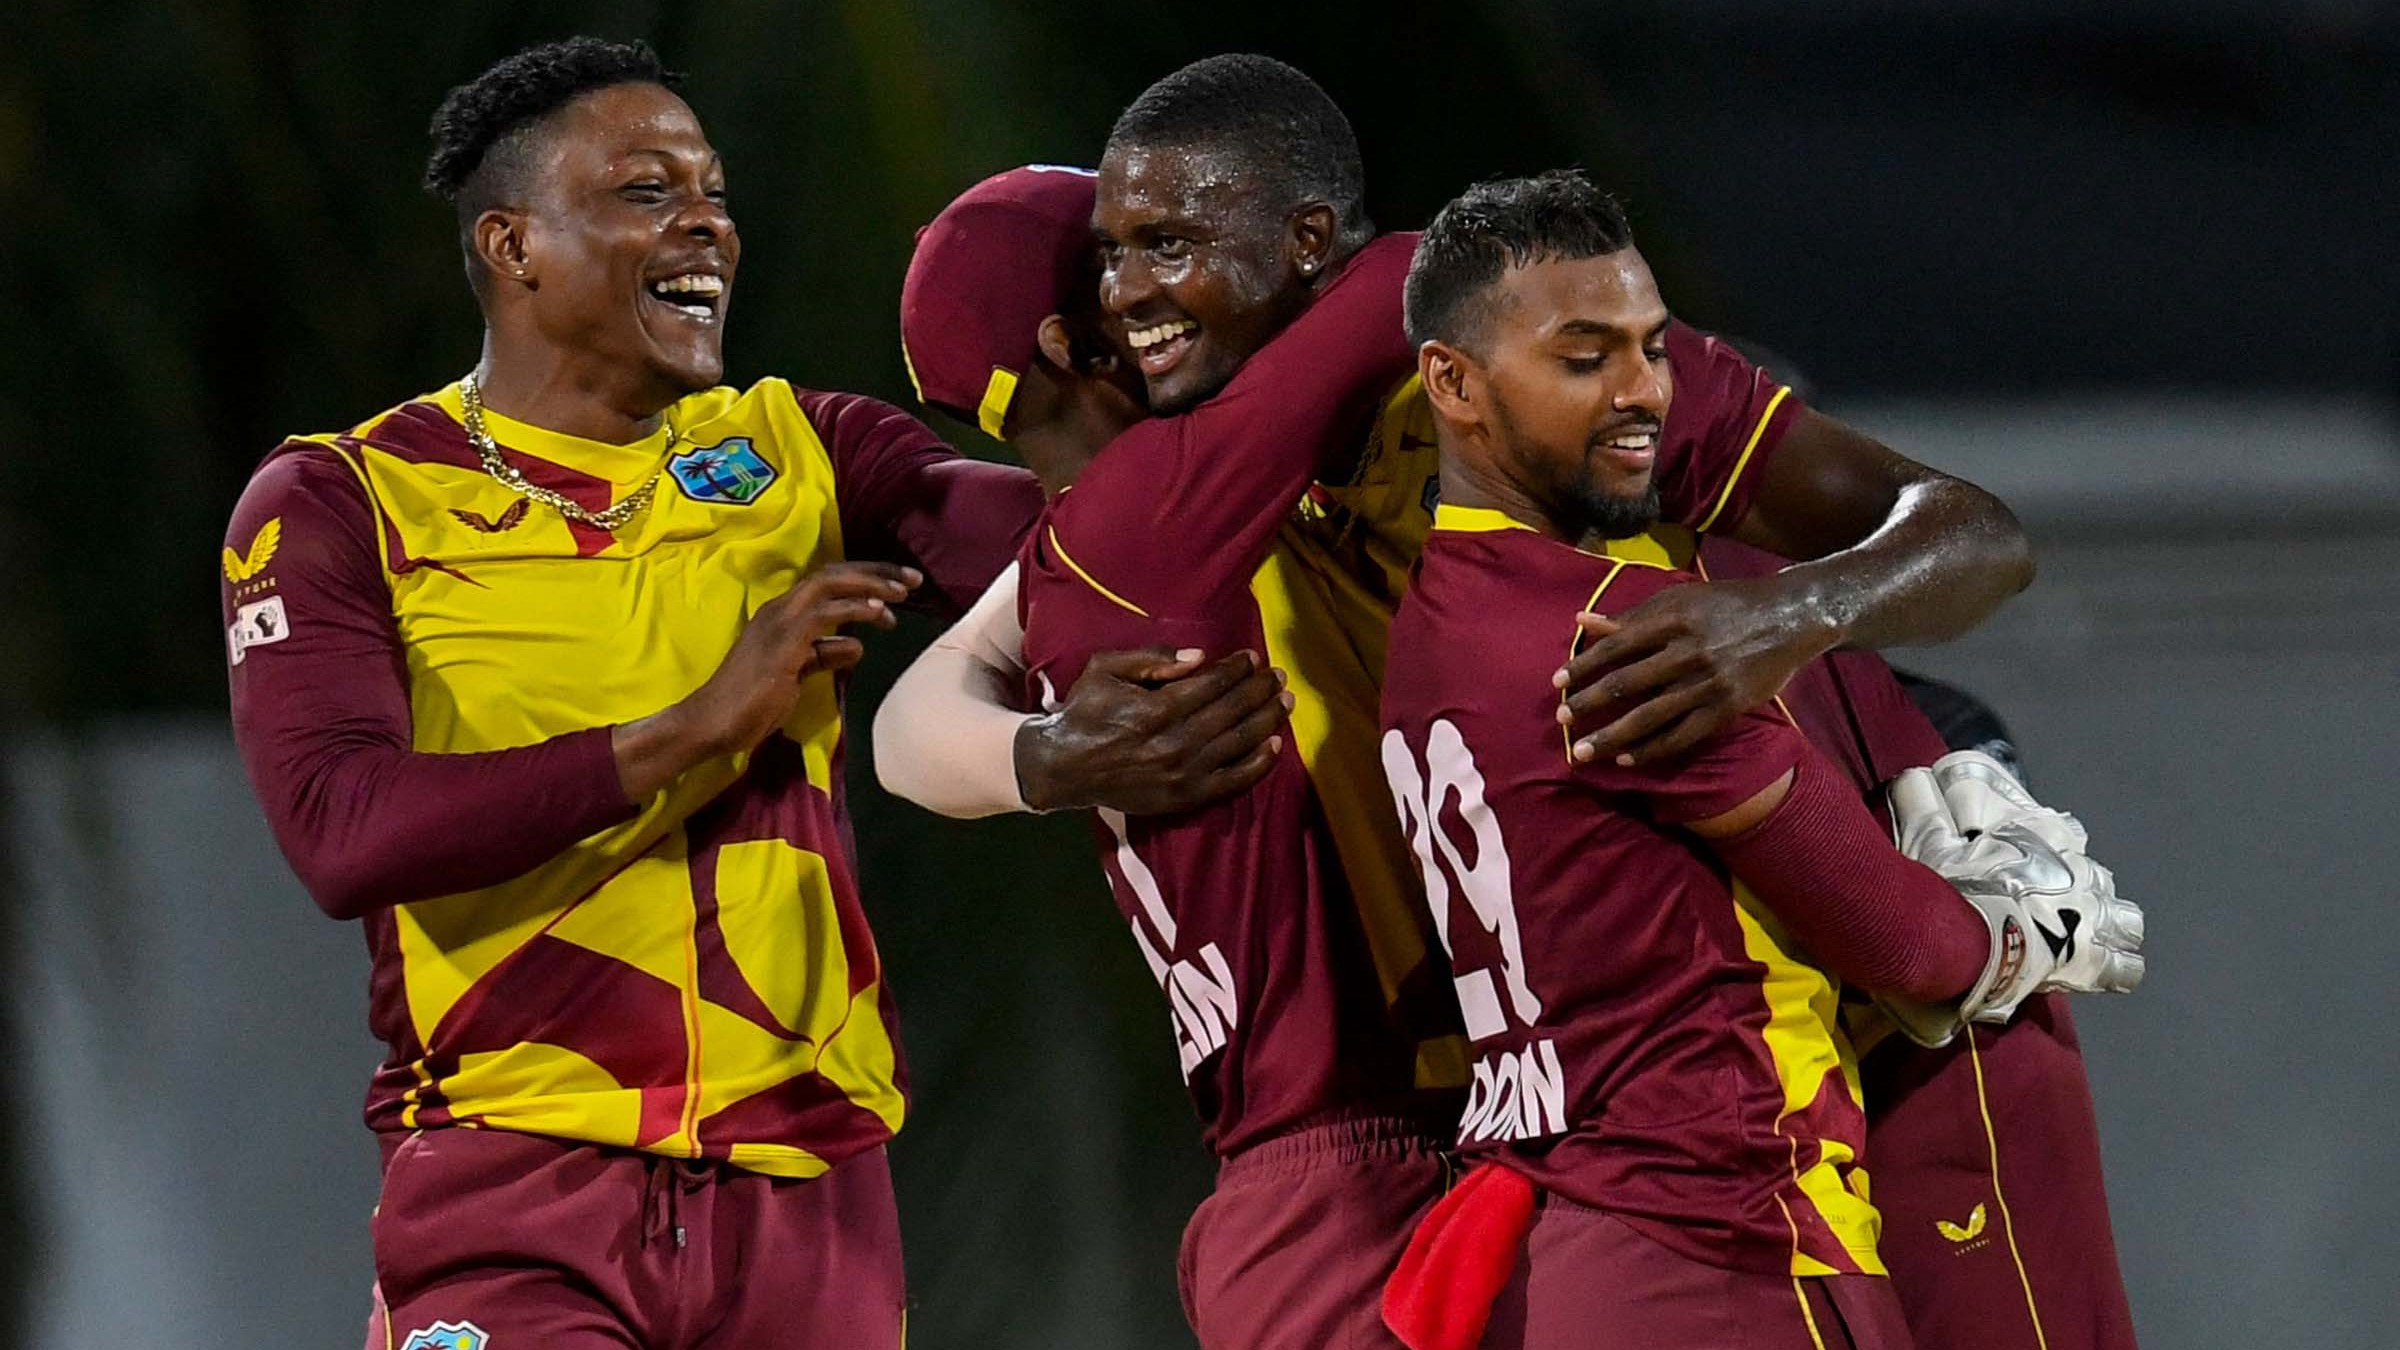 CWI announce West Indies squad for ODI tours of the Netherlands and Pakistan